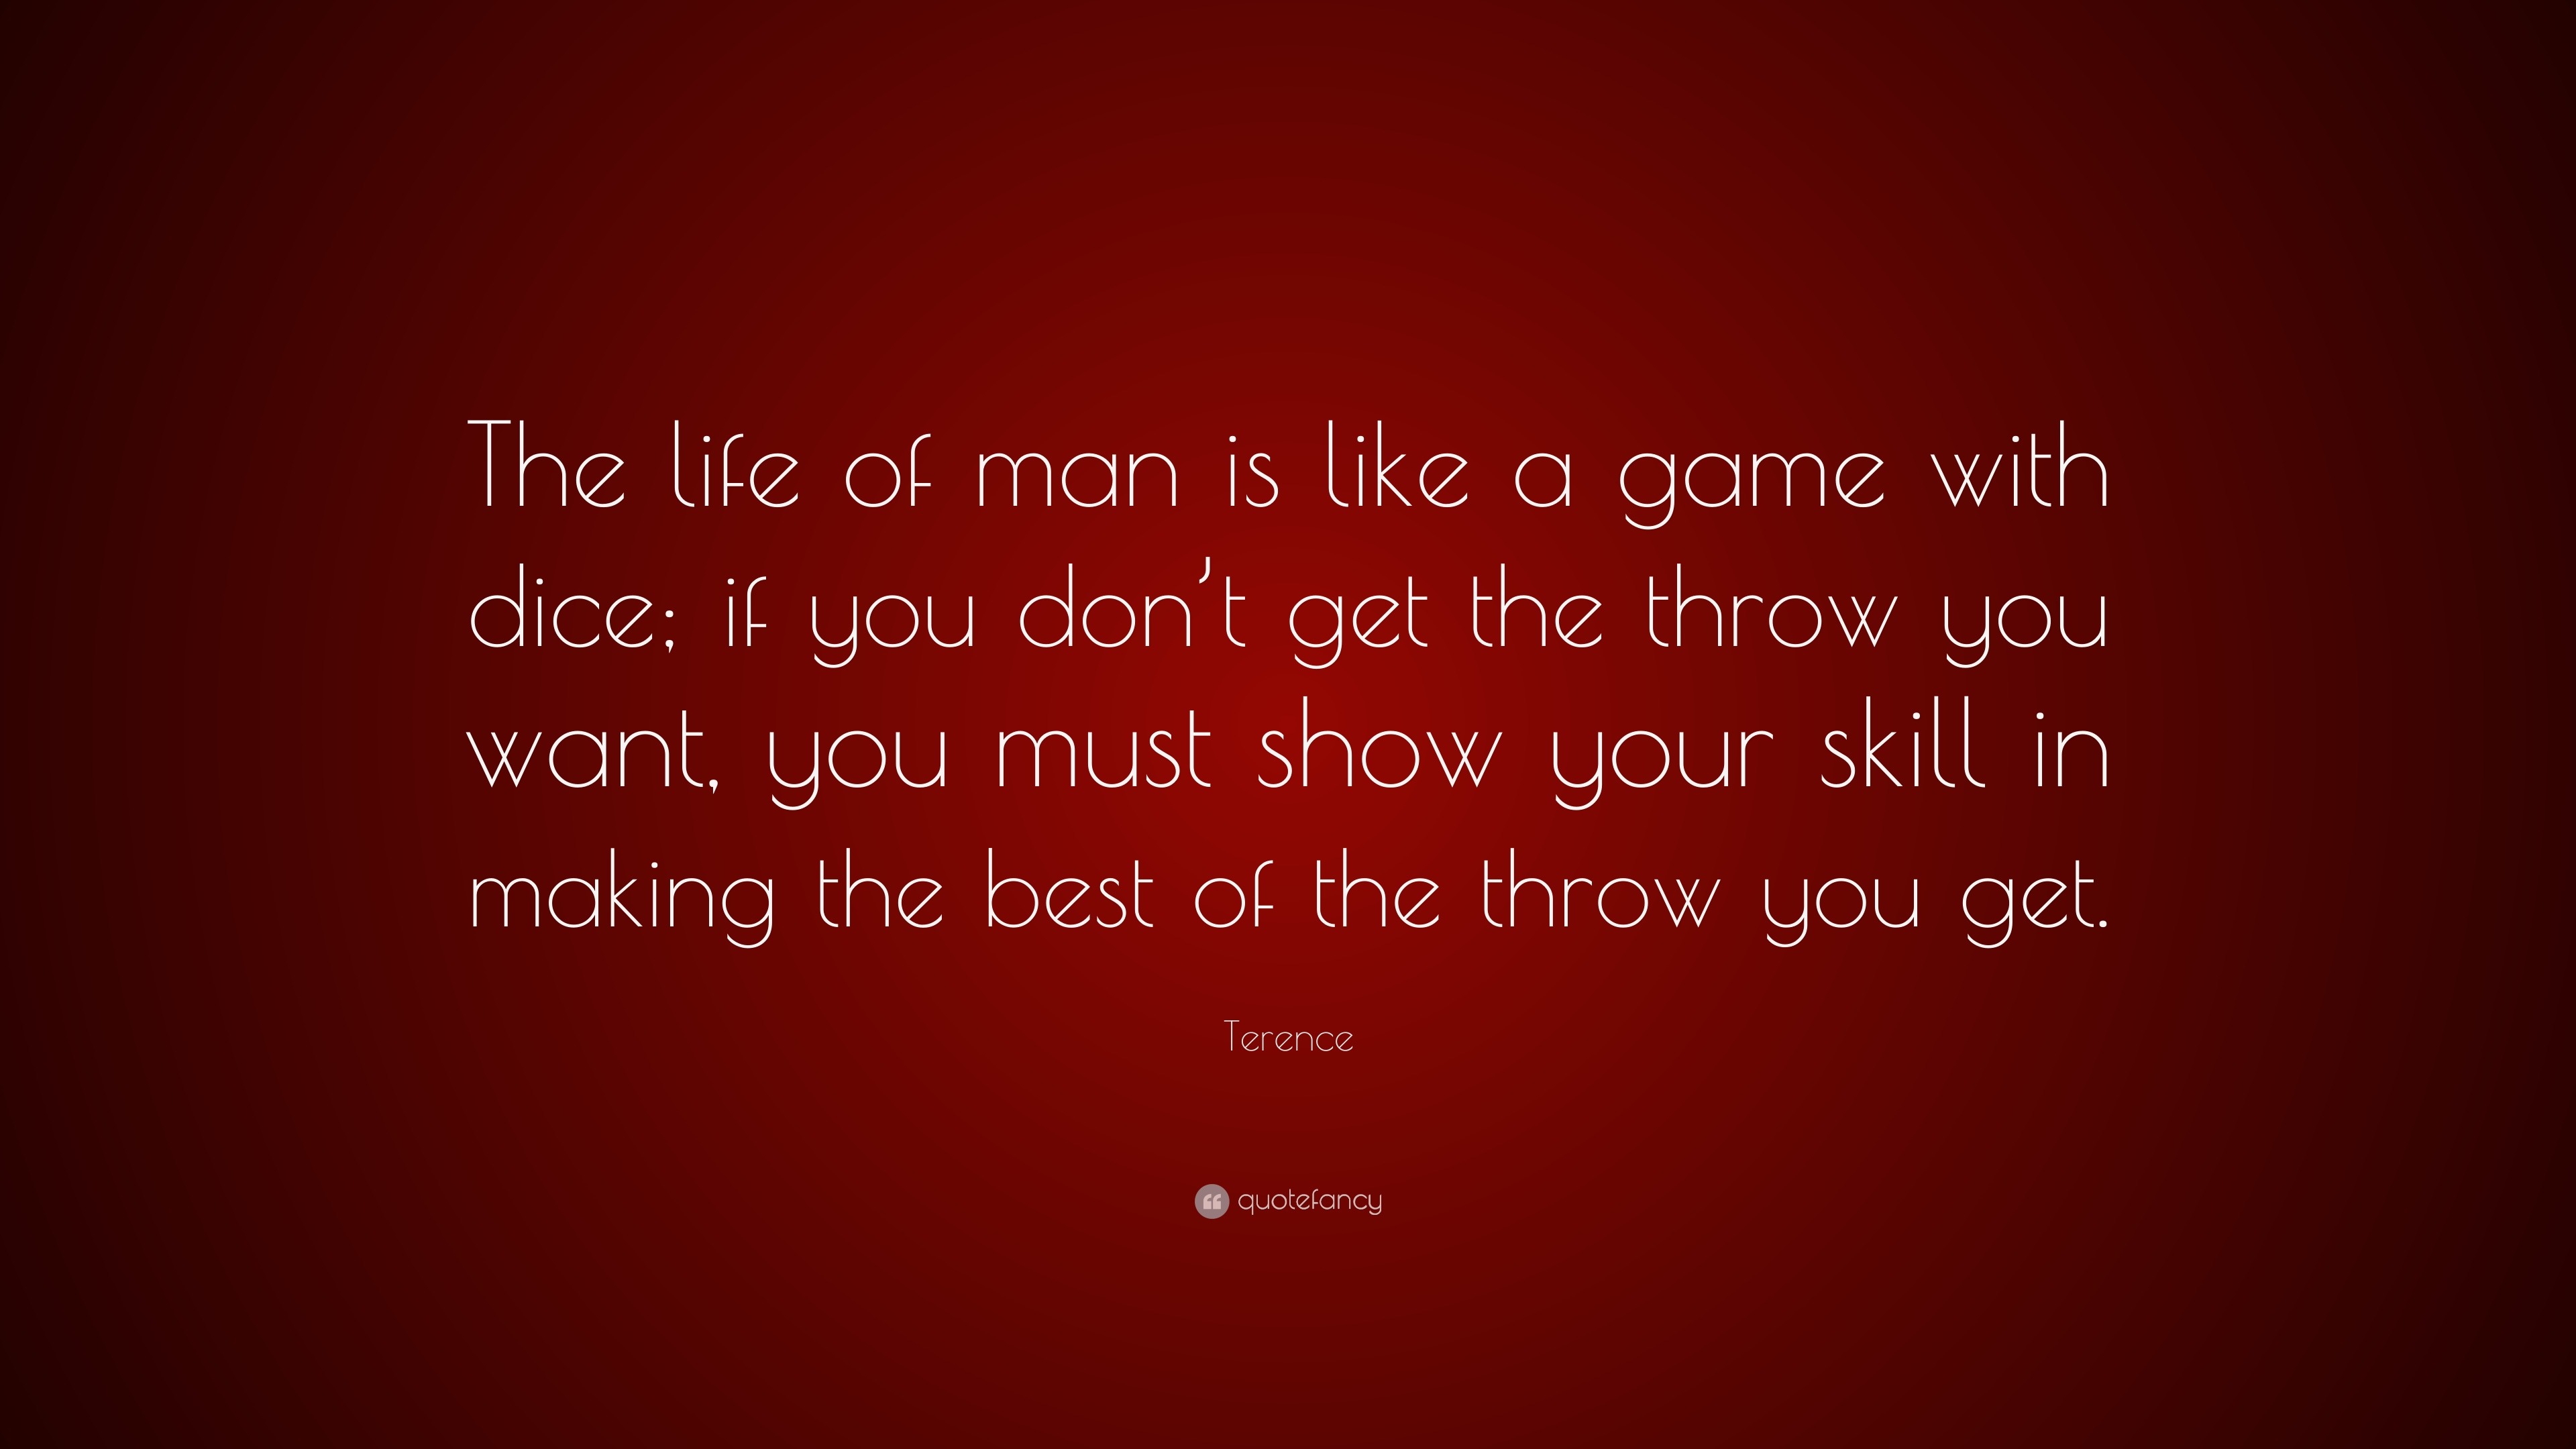 Terence Quote: “The life of man is like a game with dice; if you don’t ...